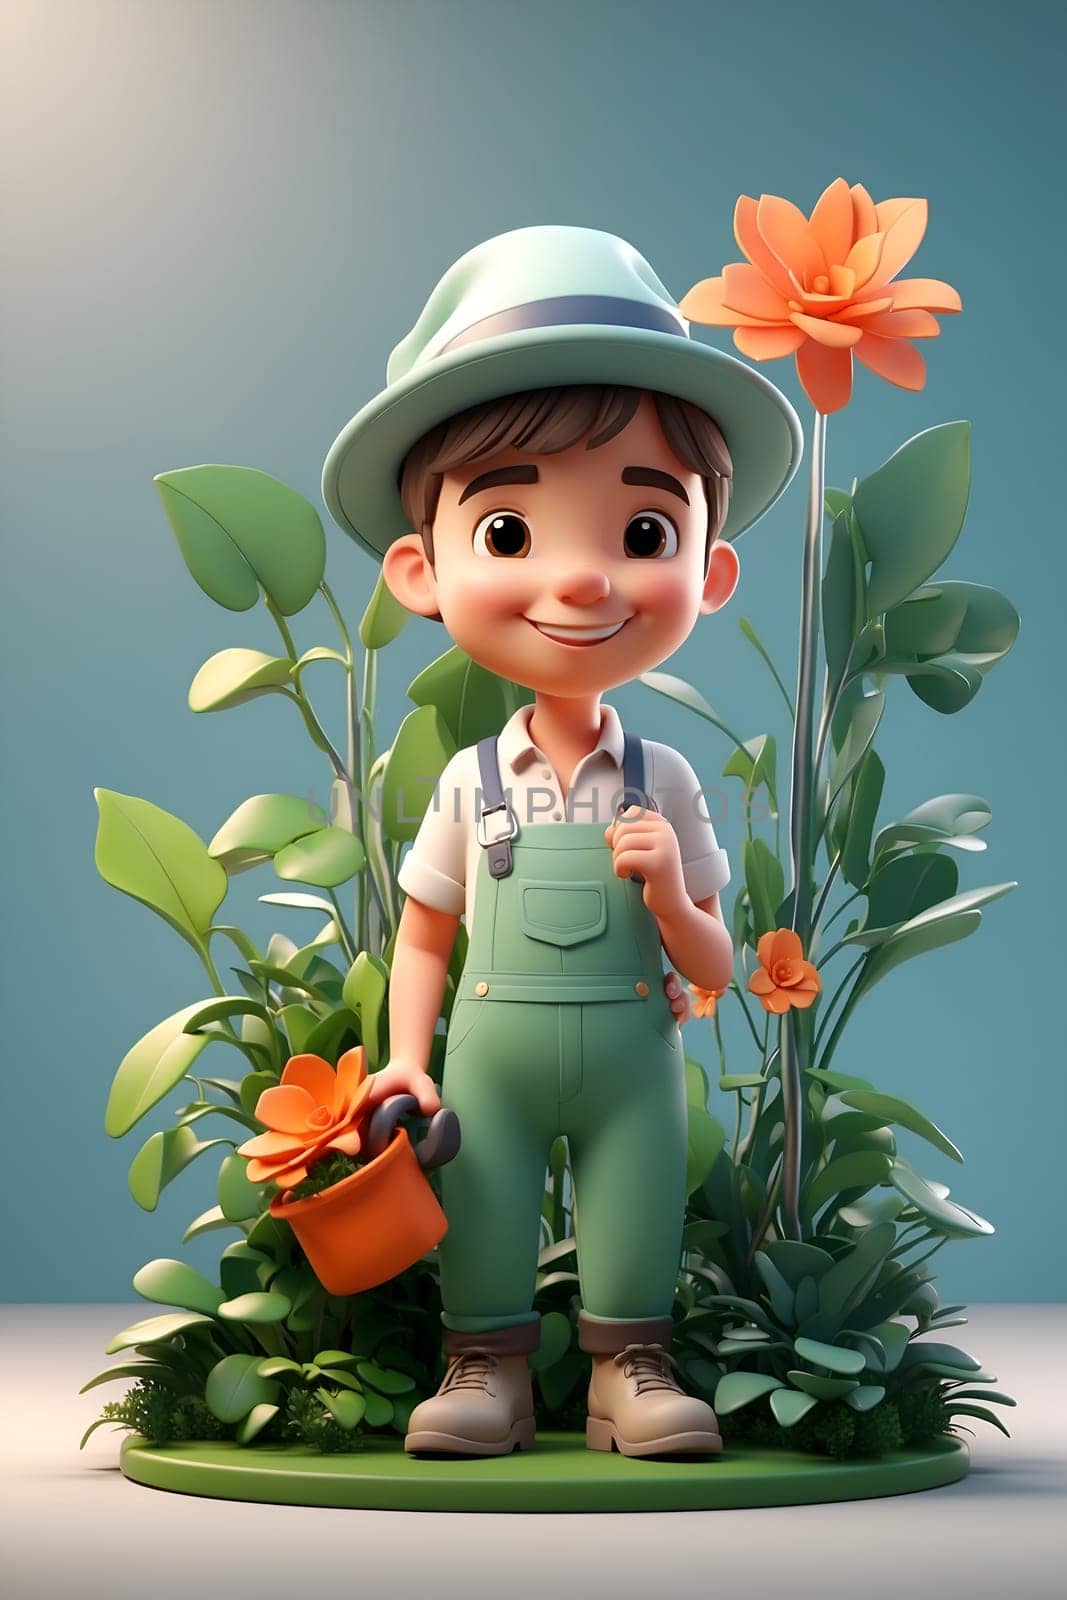 A small boy dressed in overalls and a hat holds onto a watering can, ready to water plants.